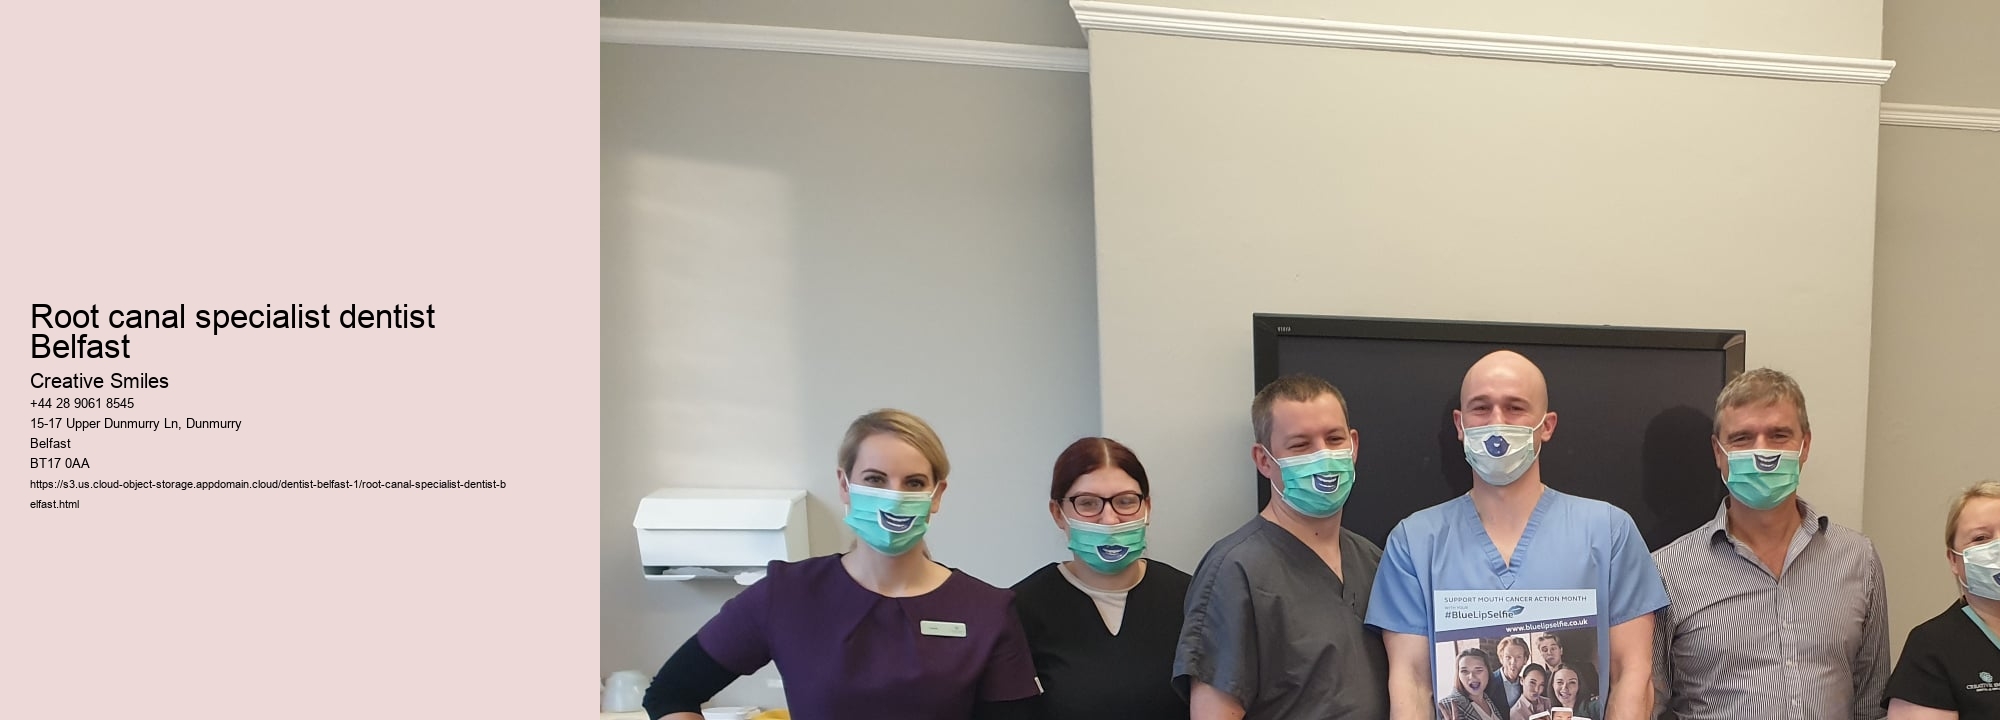 Root canal specialist dentist Belfast